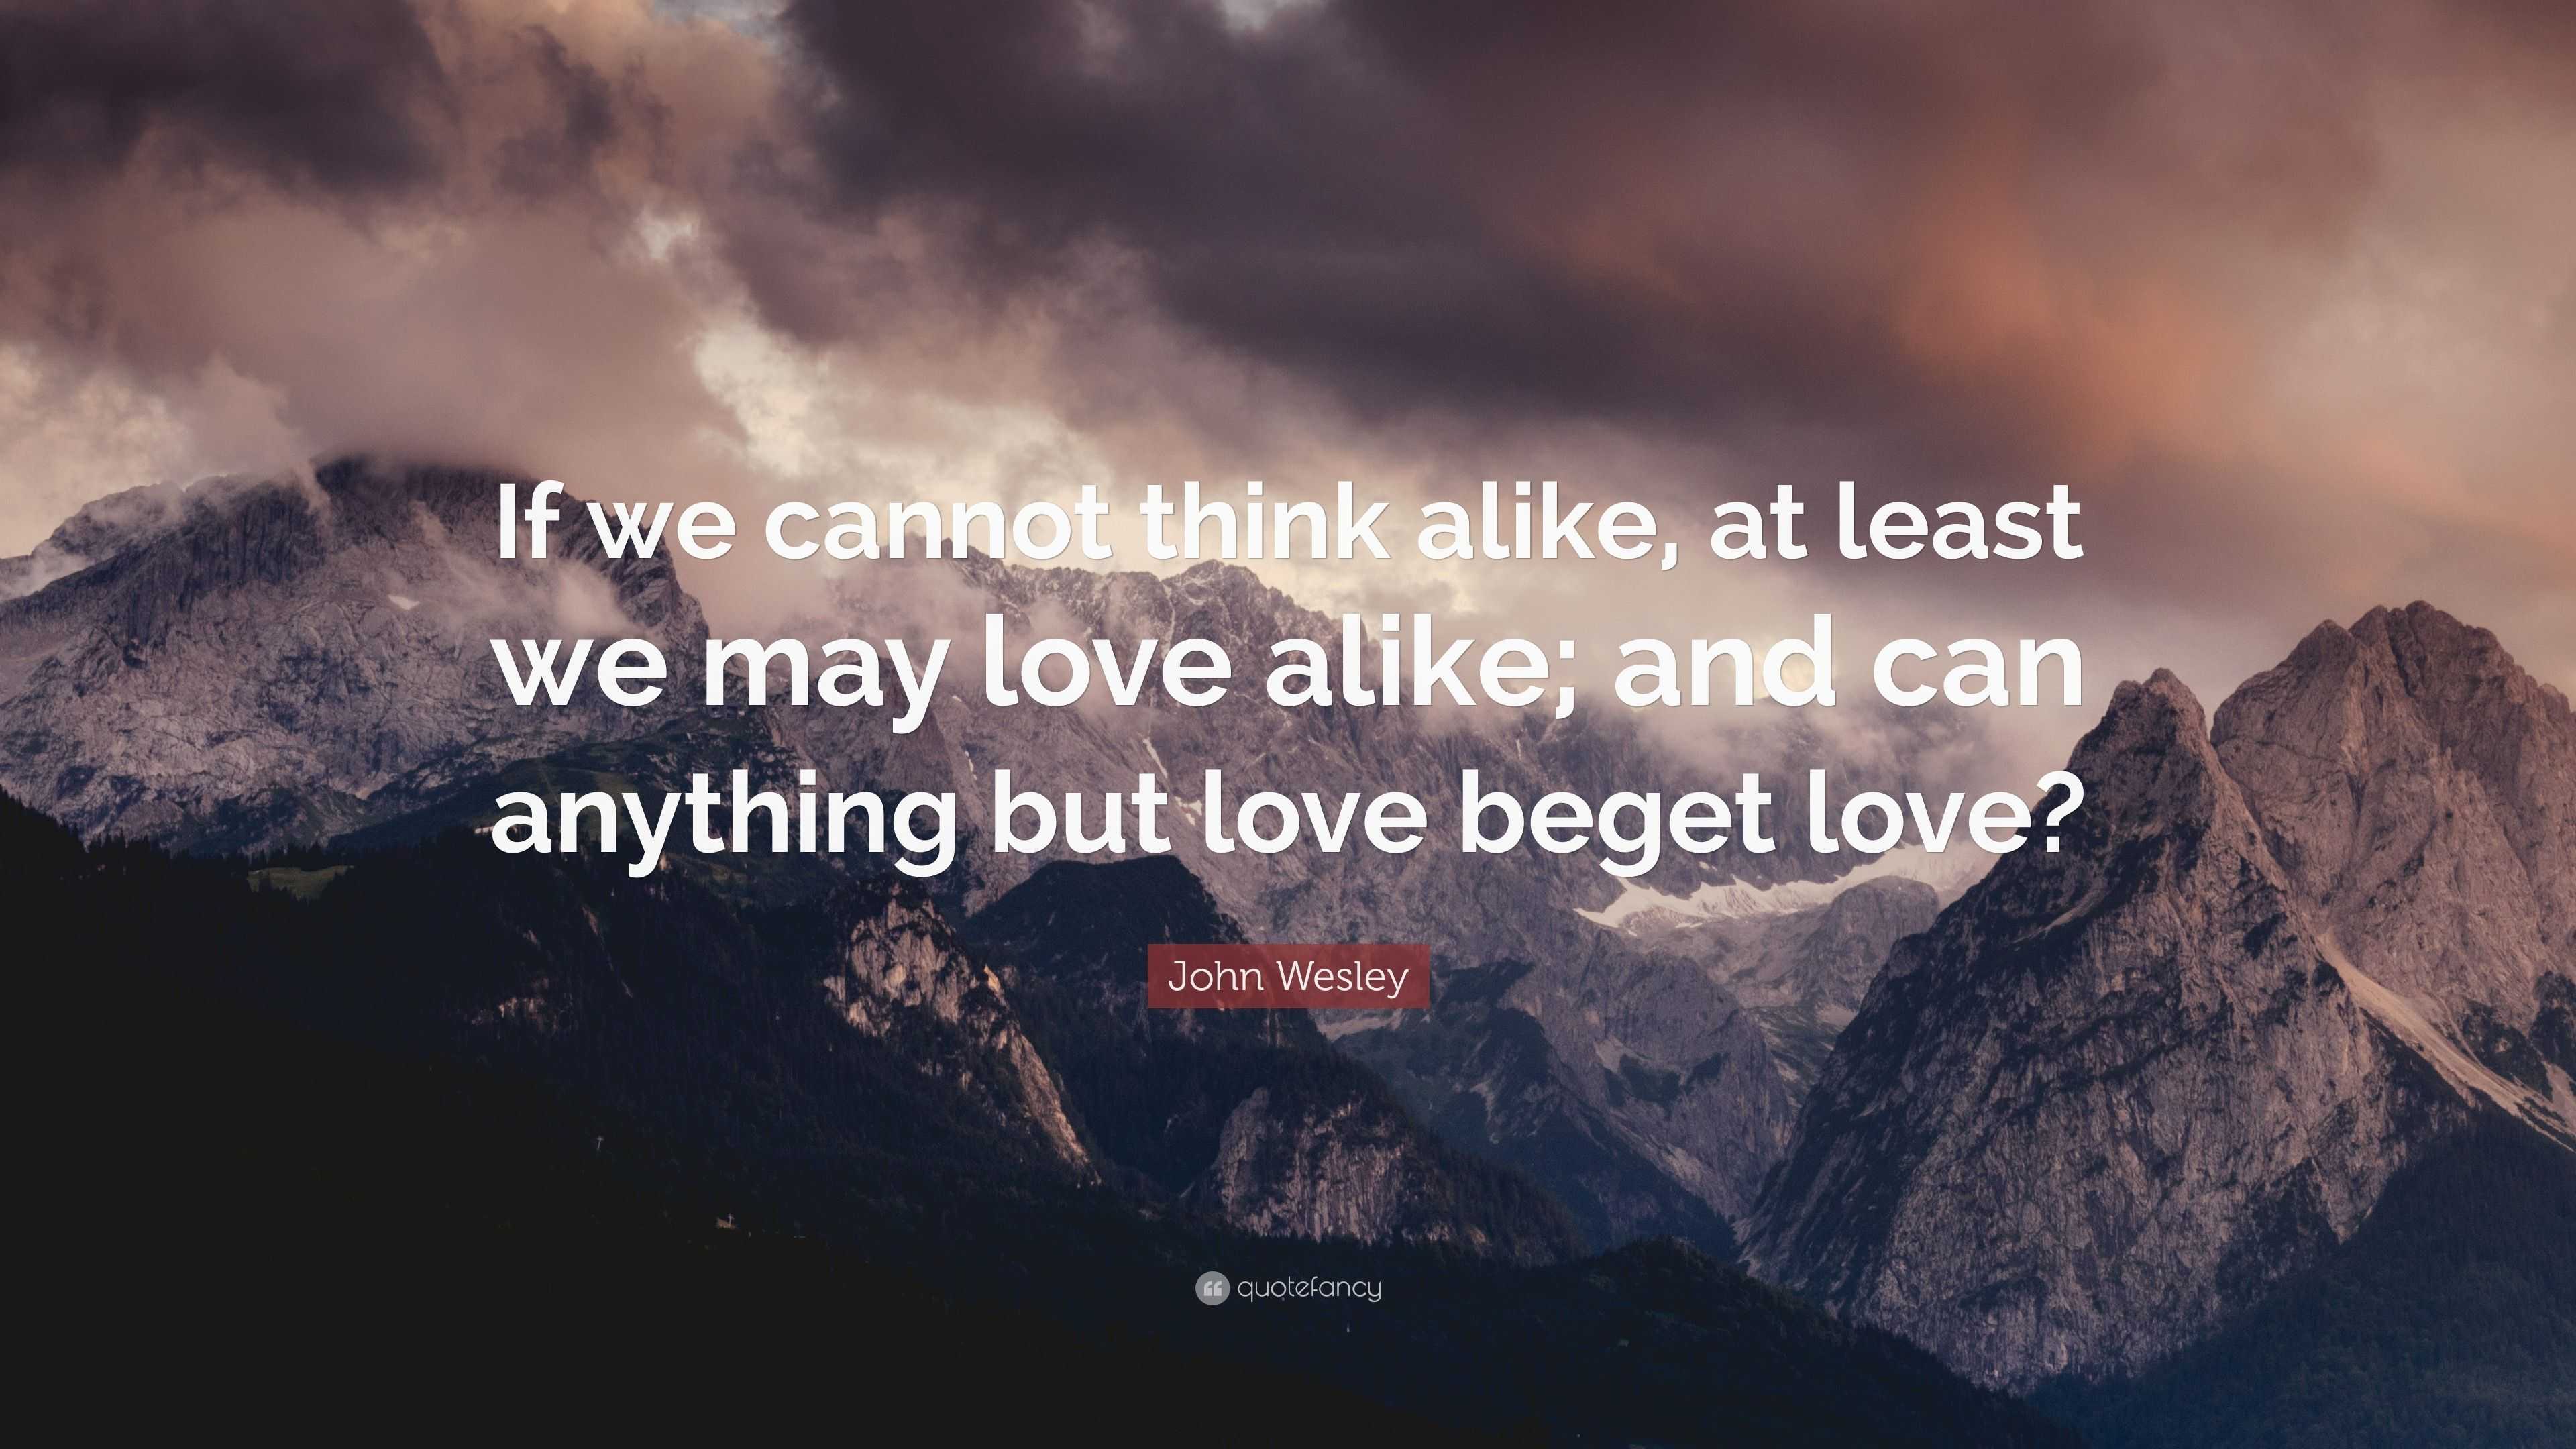 John Wesley Quote: “If we cannot think alike, at least we may love ...